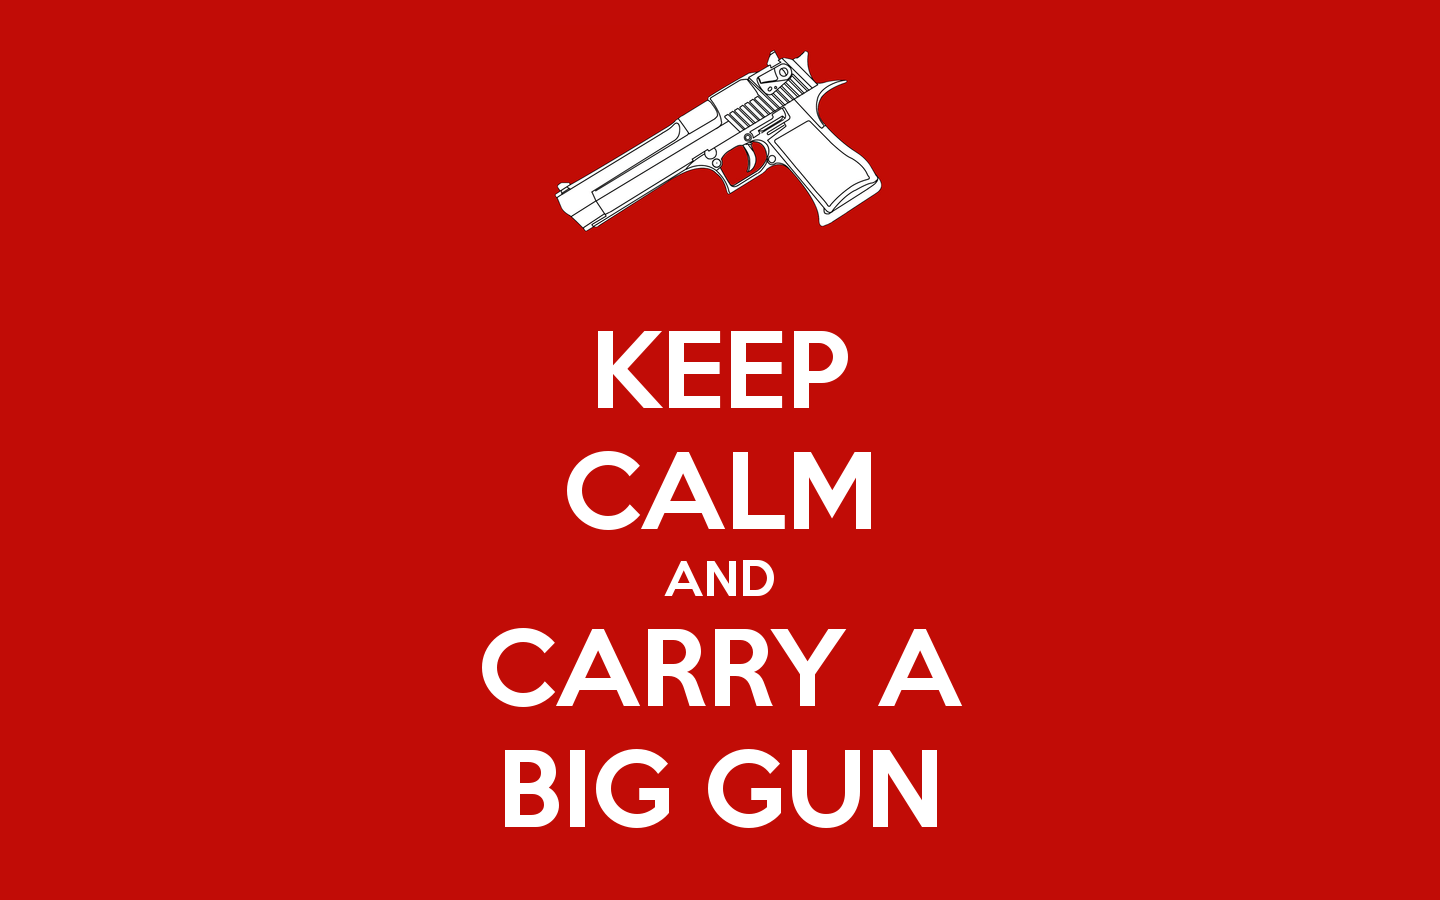 Keep Calm And Carry On Gun HD Wallpaper, Background Image